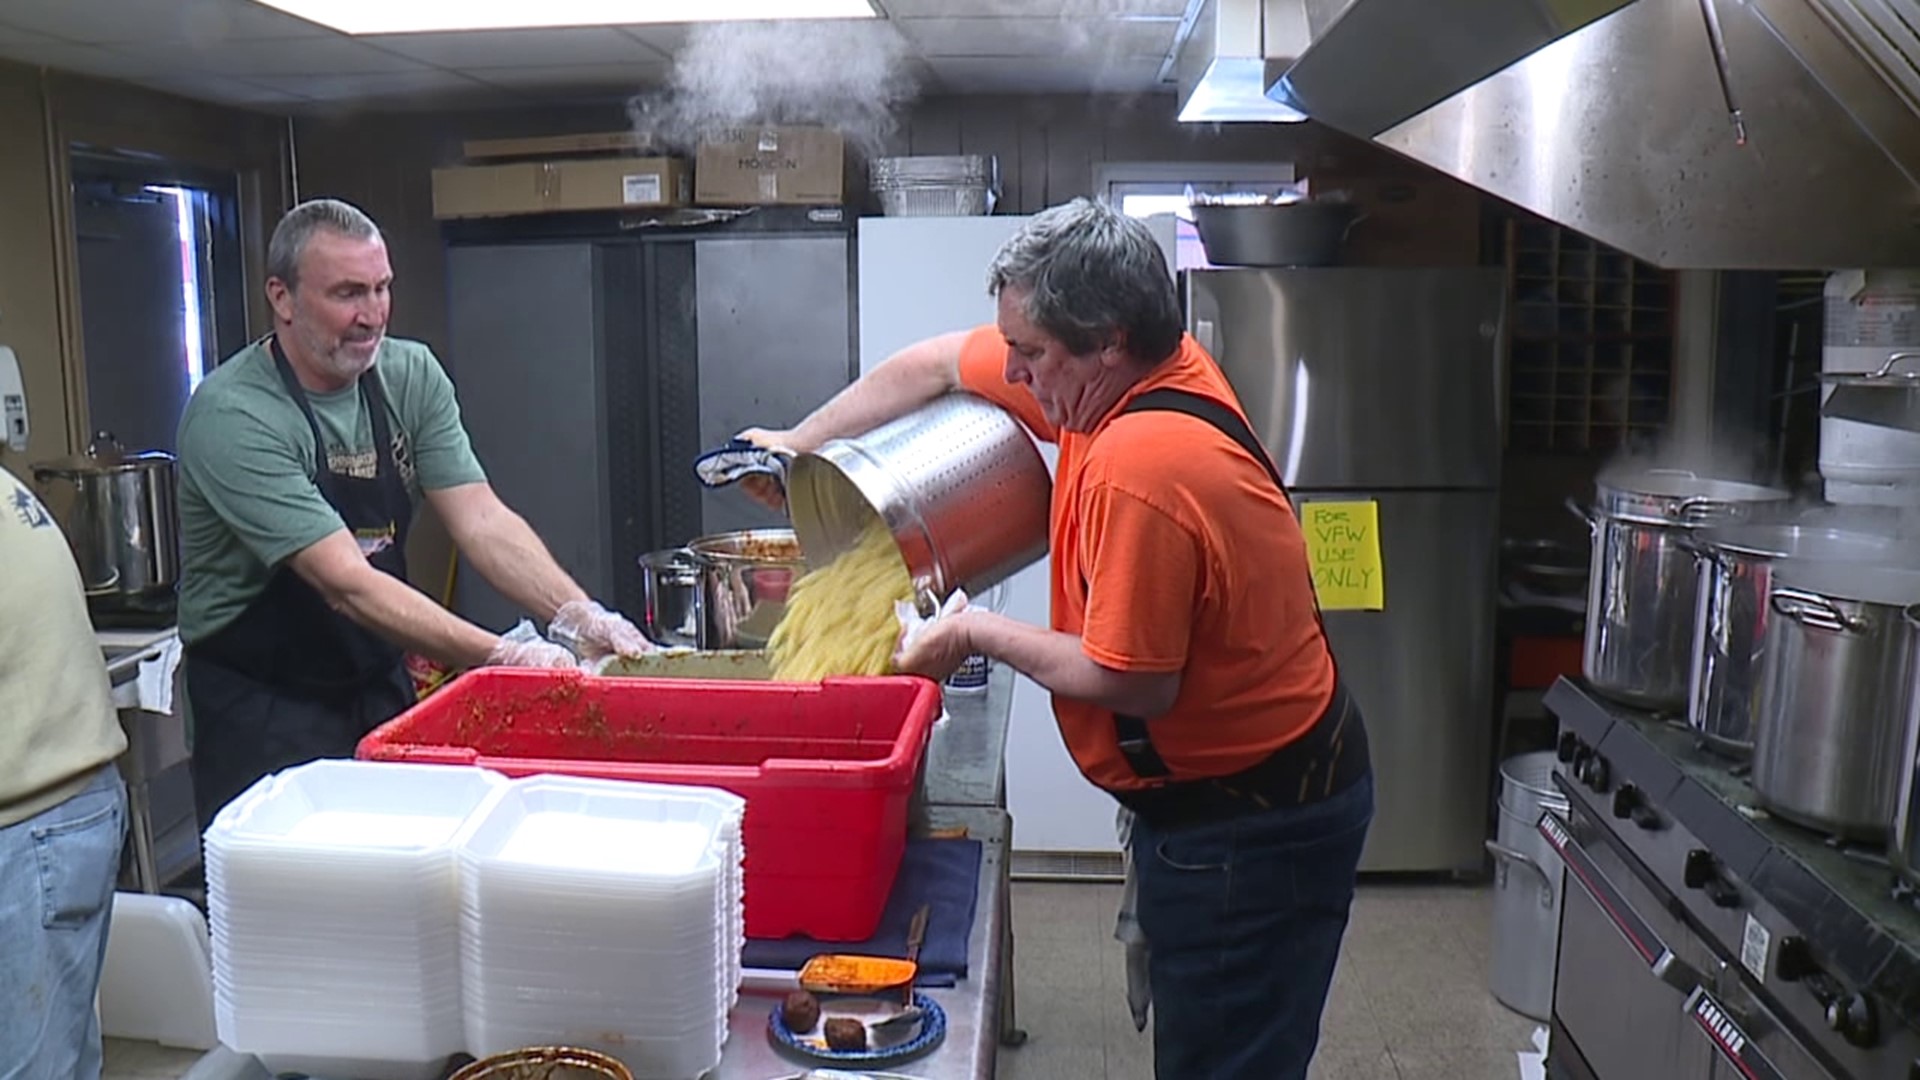 A pasta dinner in Archbald helped raise money for a special project.